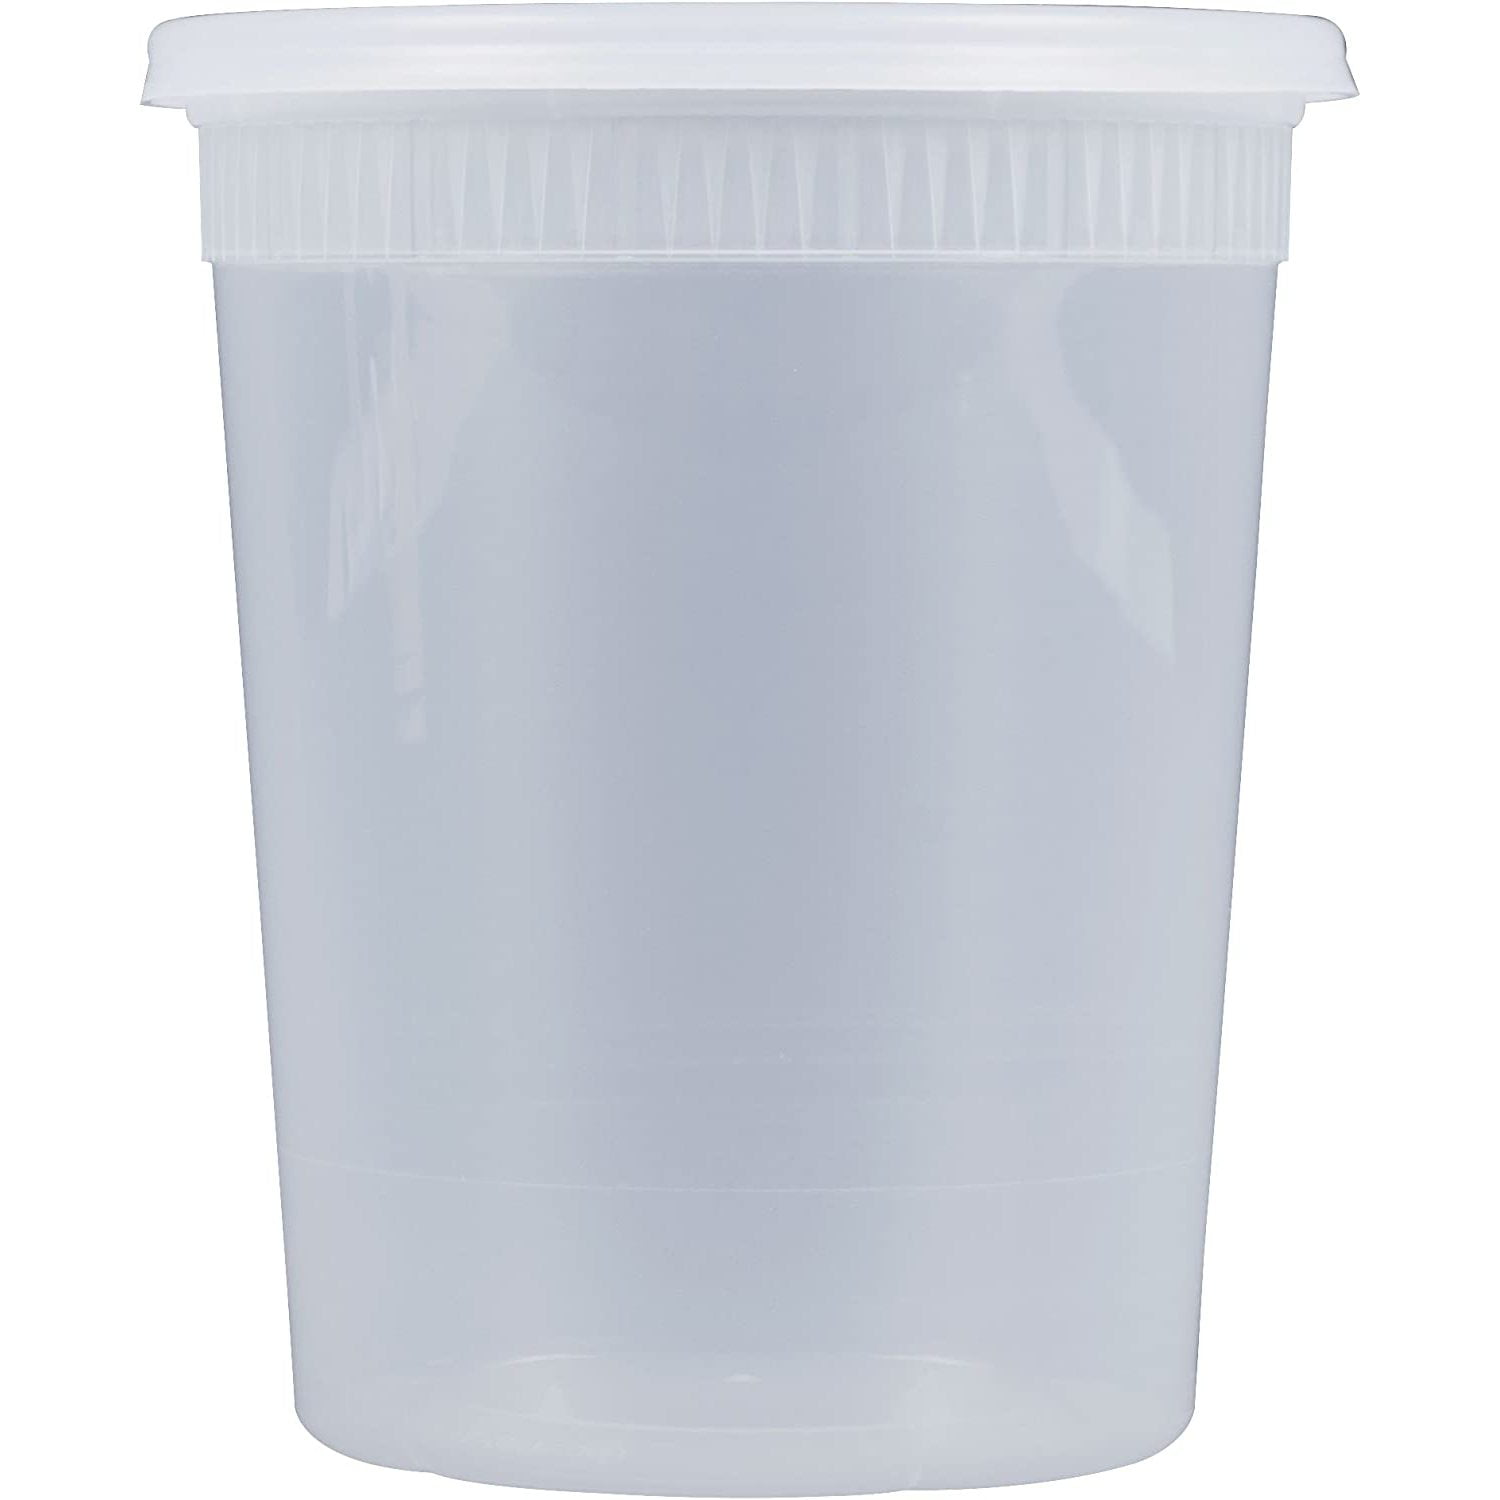 32 oz. Clear Deli Containers and Lids, Case of 240 – CiboWares